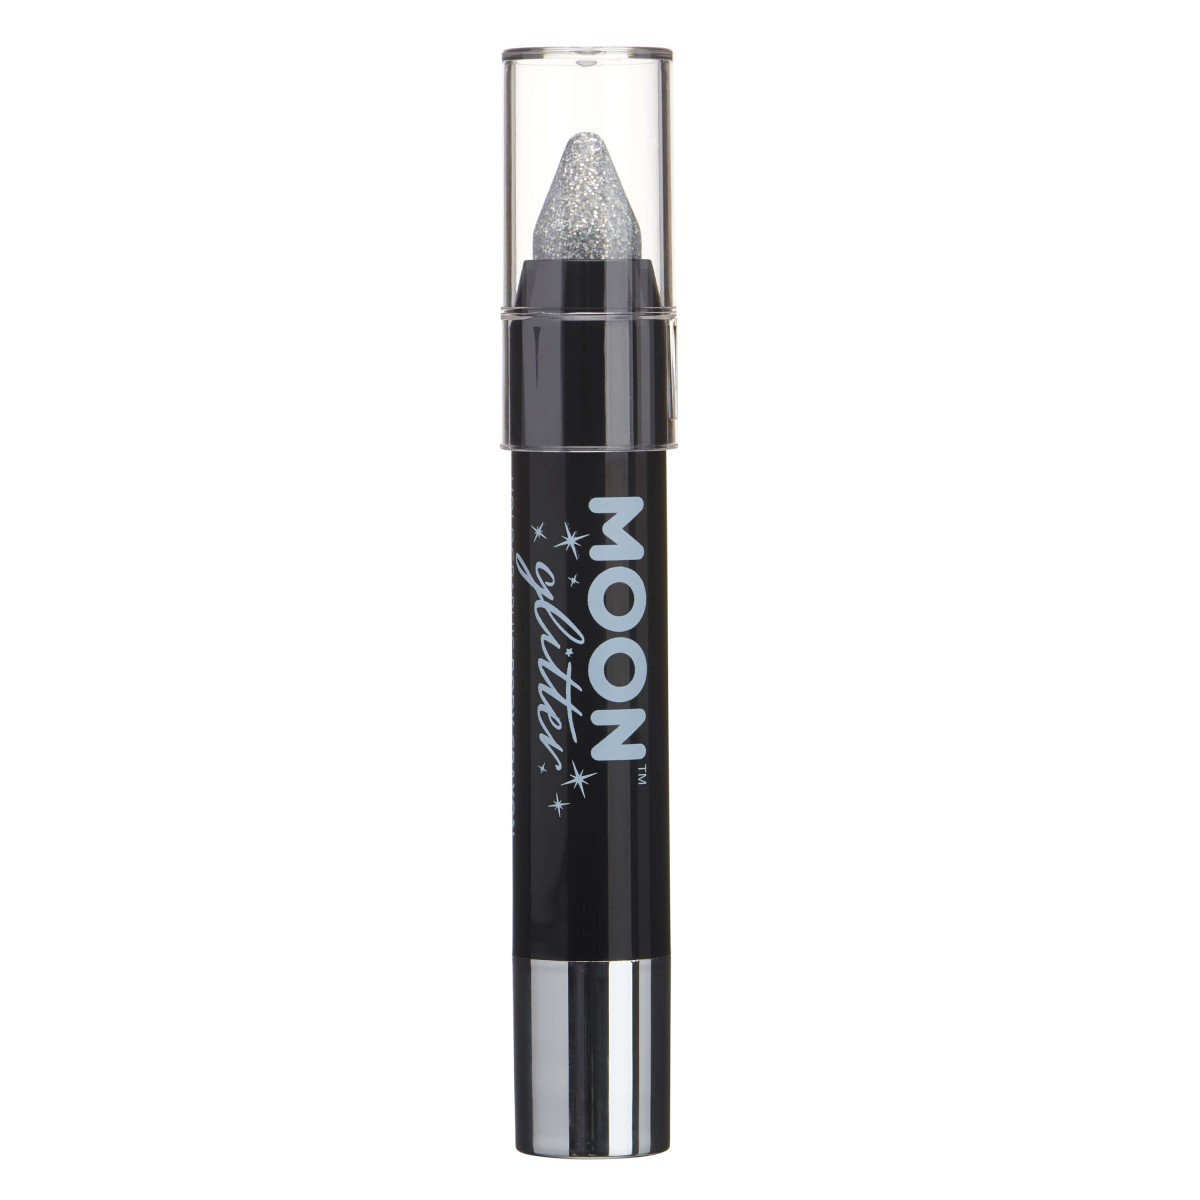 MOON CREATIONS G2 HOLOGRAPHIC GLITTER FACE & BODY CRAYON SILVER 3.2g